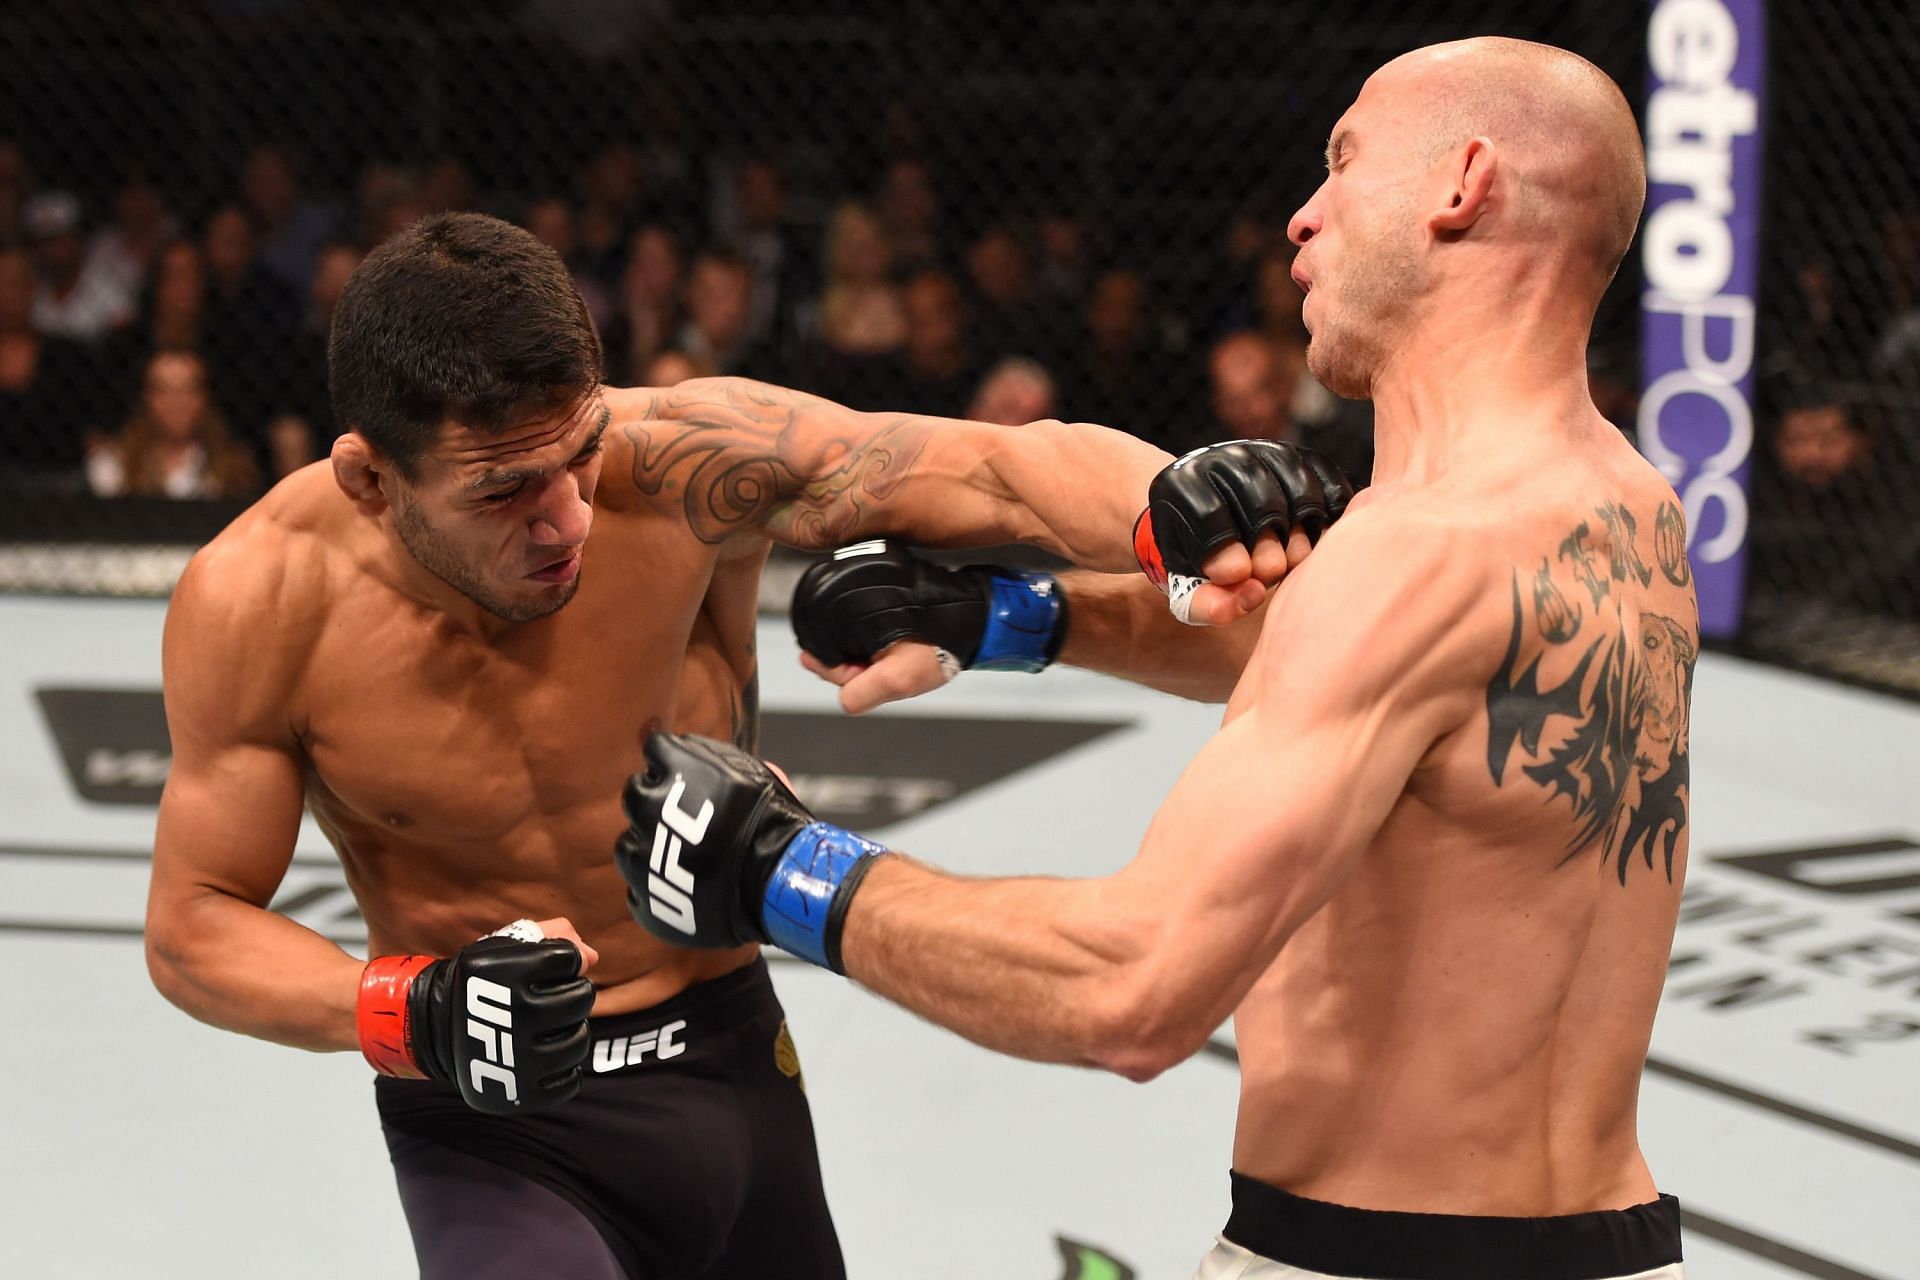 The UFC&#039;s Fox era peaked with its 17th event on the network, headlined by Rafael Dos Anjos and Donald Cerrone